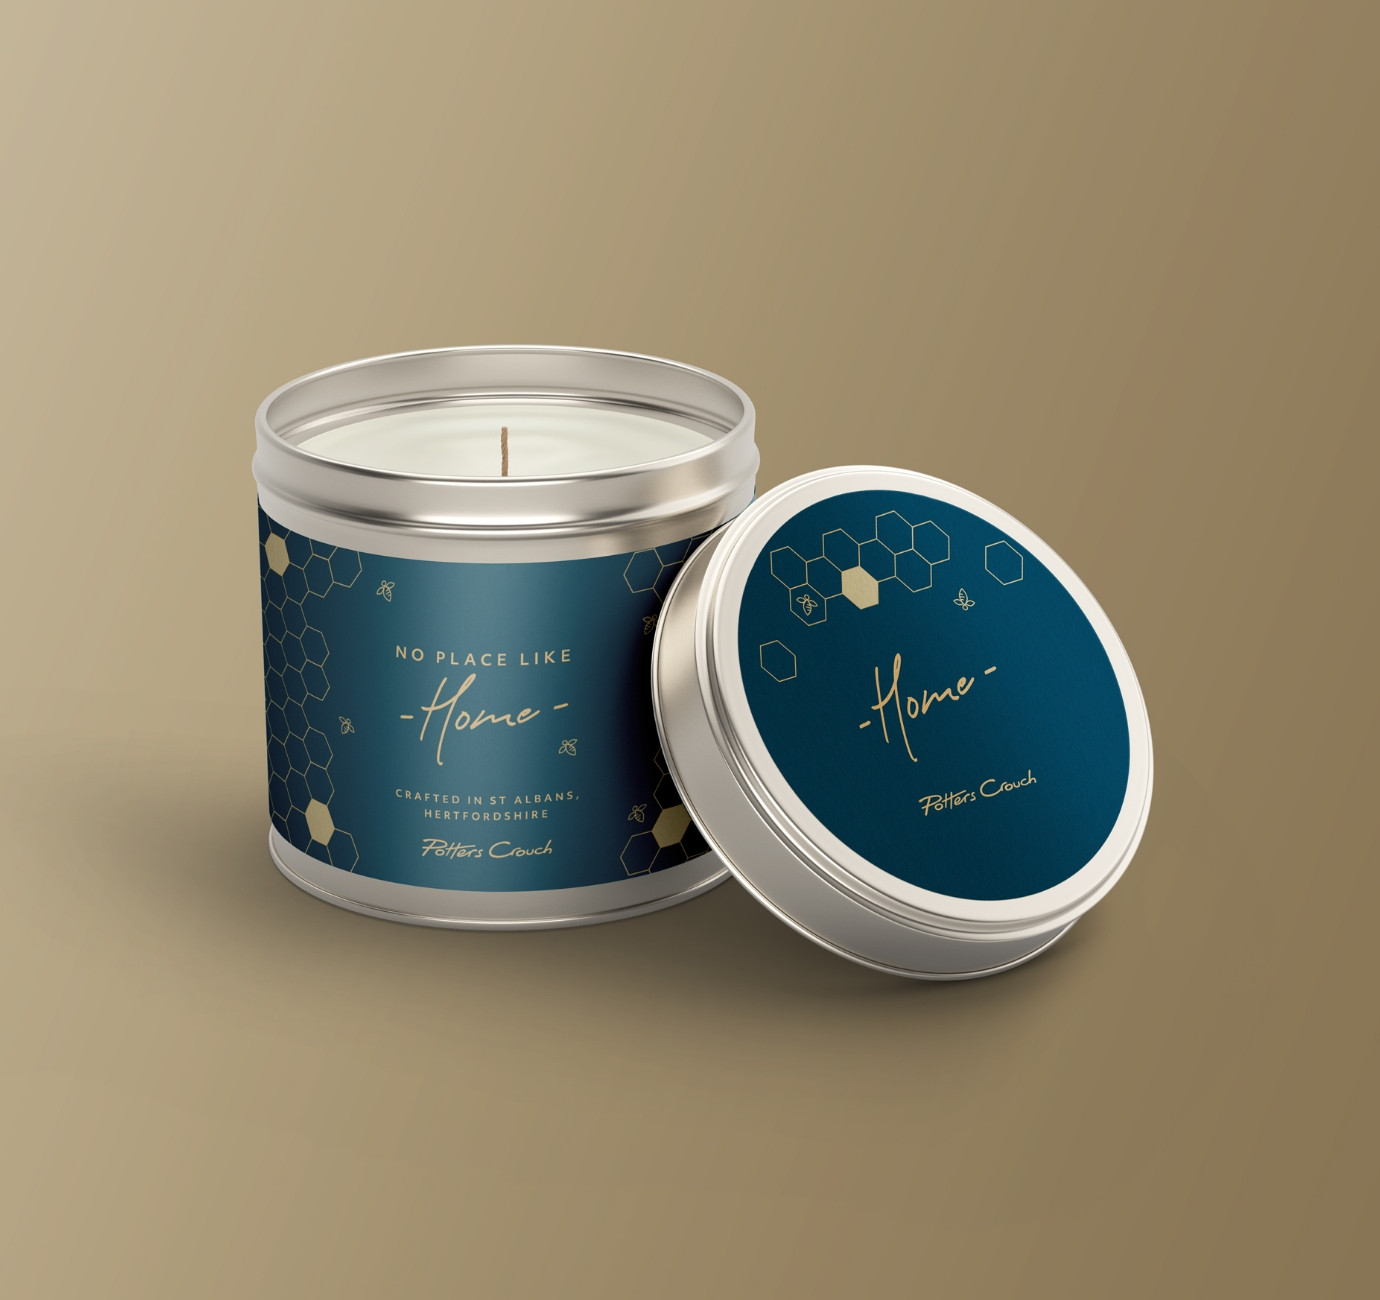 Potters Crouch Candle Tin Label Design by Root Studio